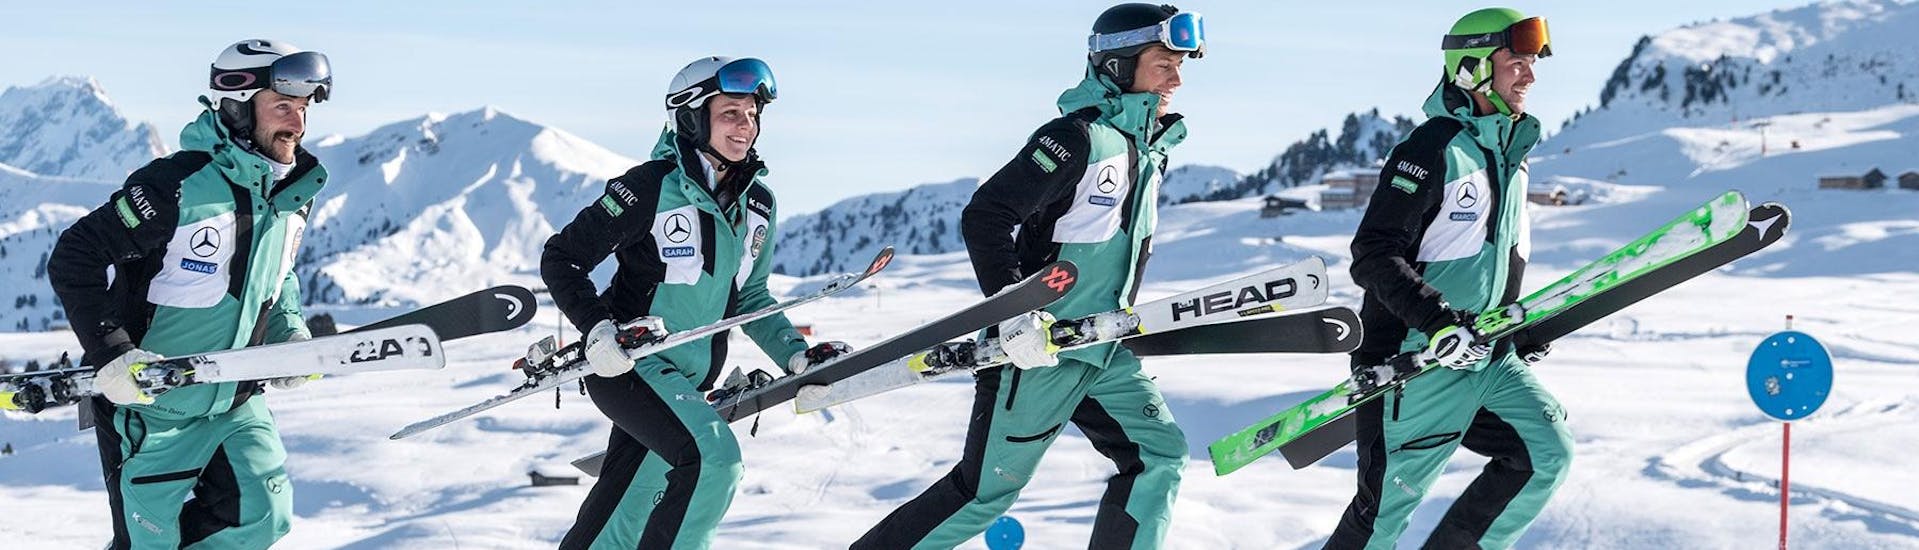 Ski instructors from Skischool Schlern 3000 facing in one direction with their skis.